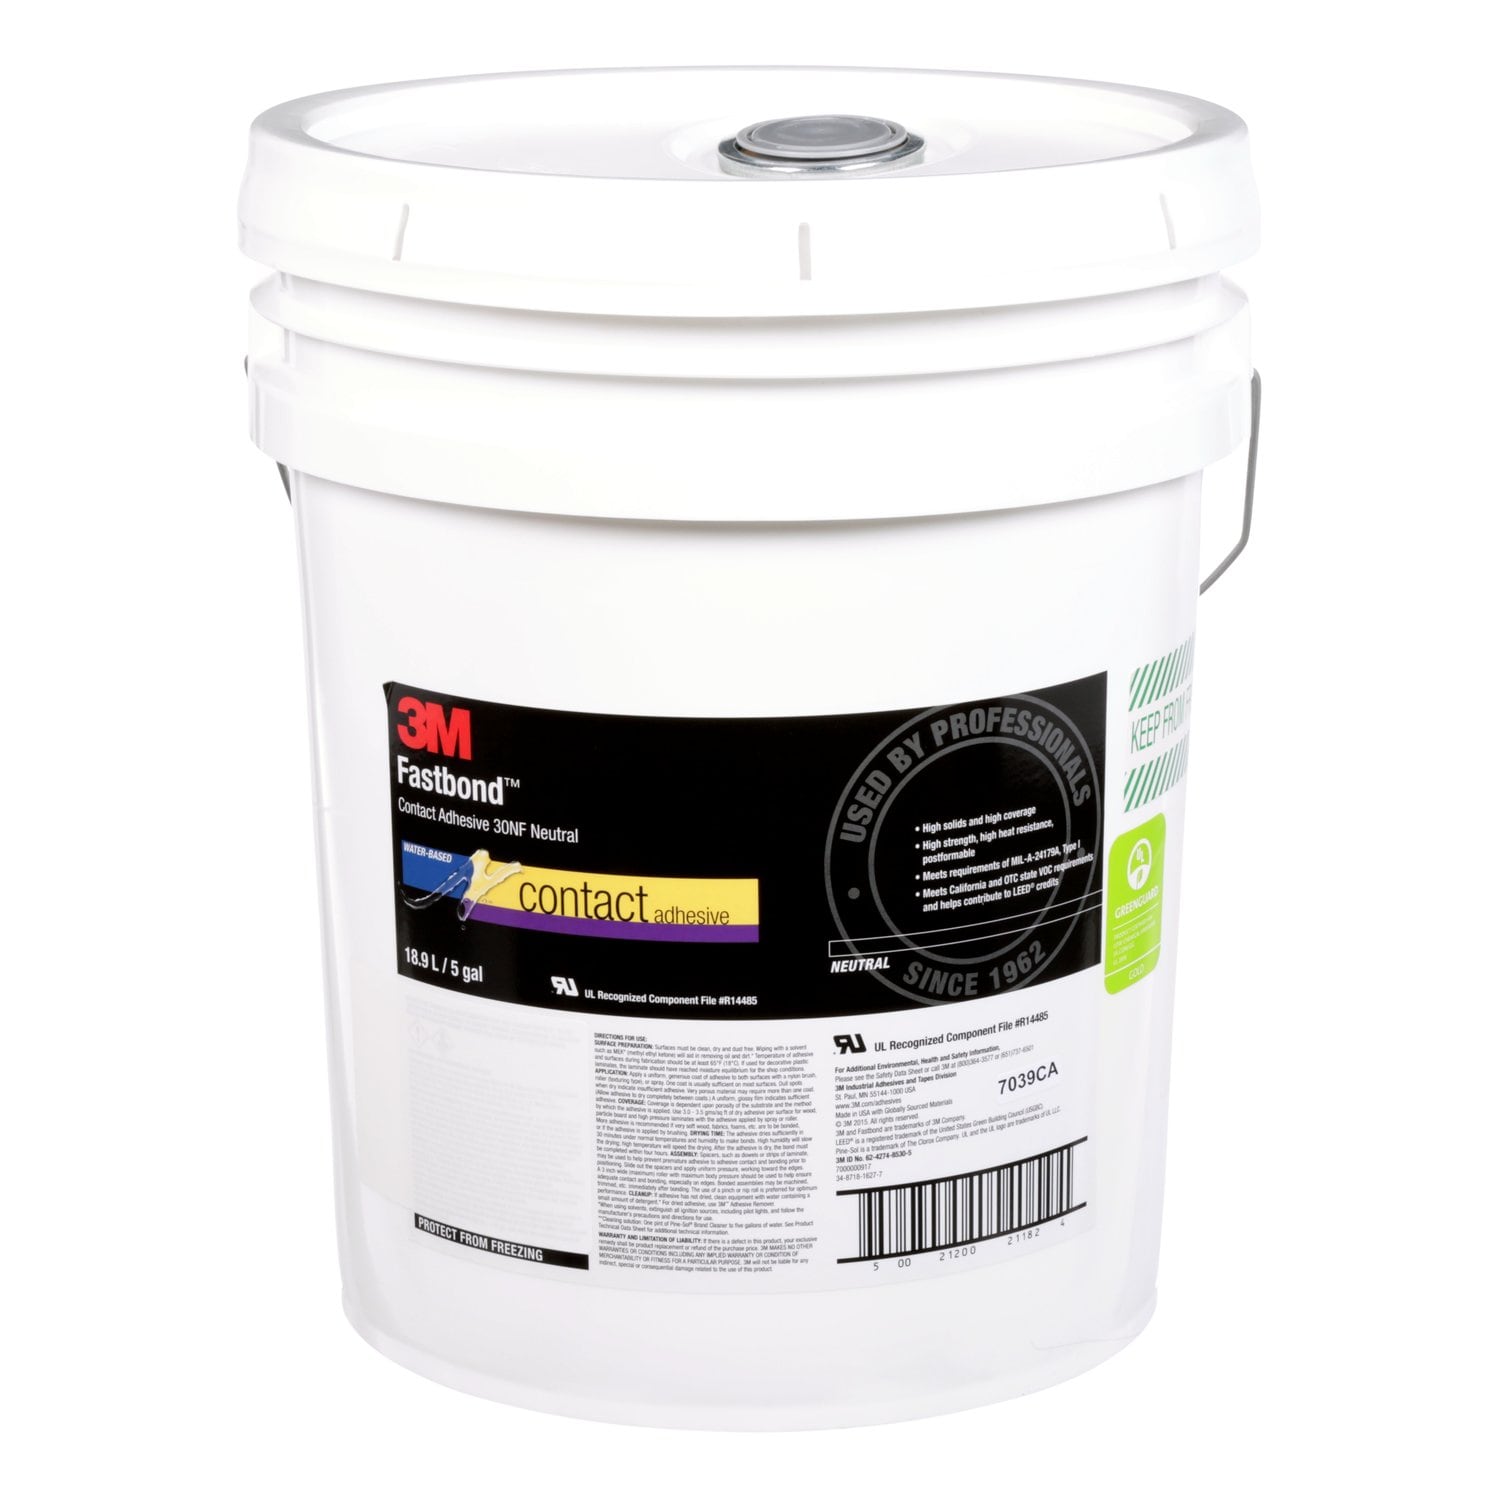 7000000917 - 3M Fastbond Contact Adhesive 30NF, Neutral, 5 Gallon Drum (Pail)